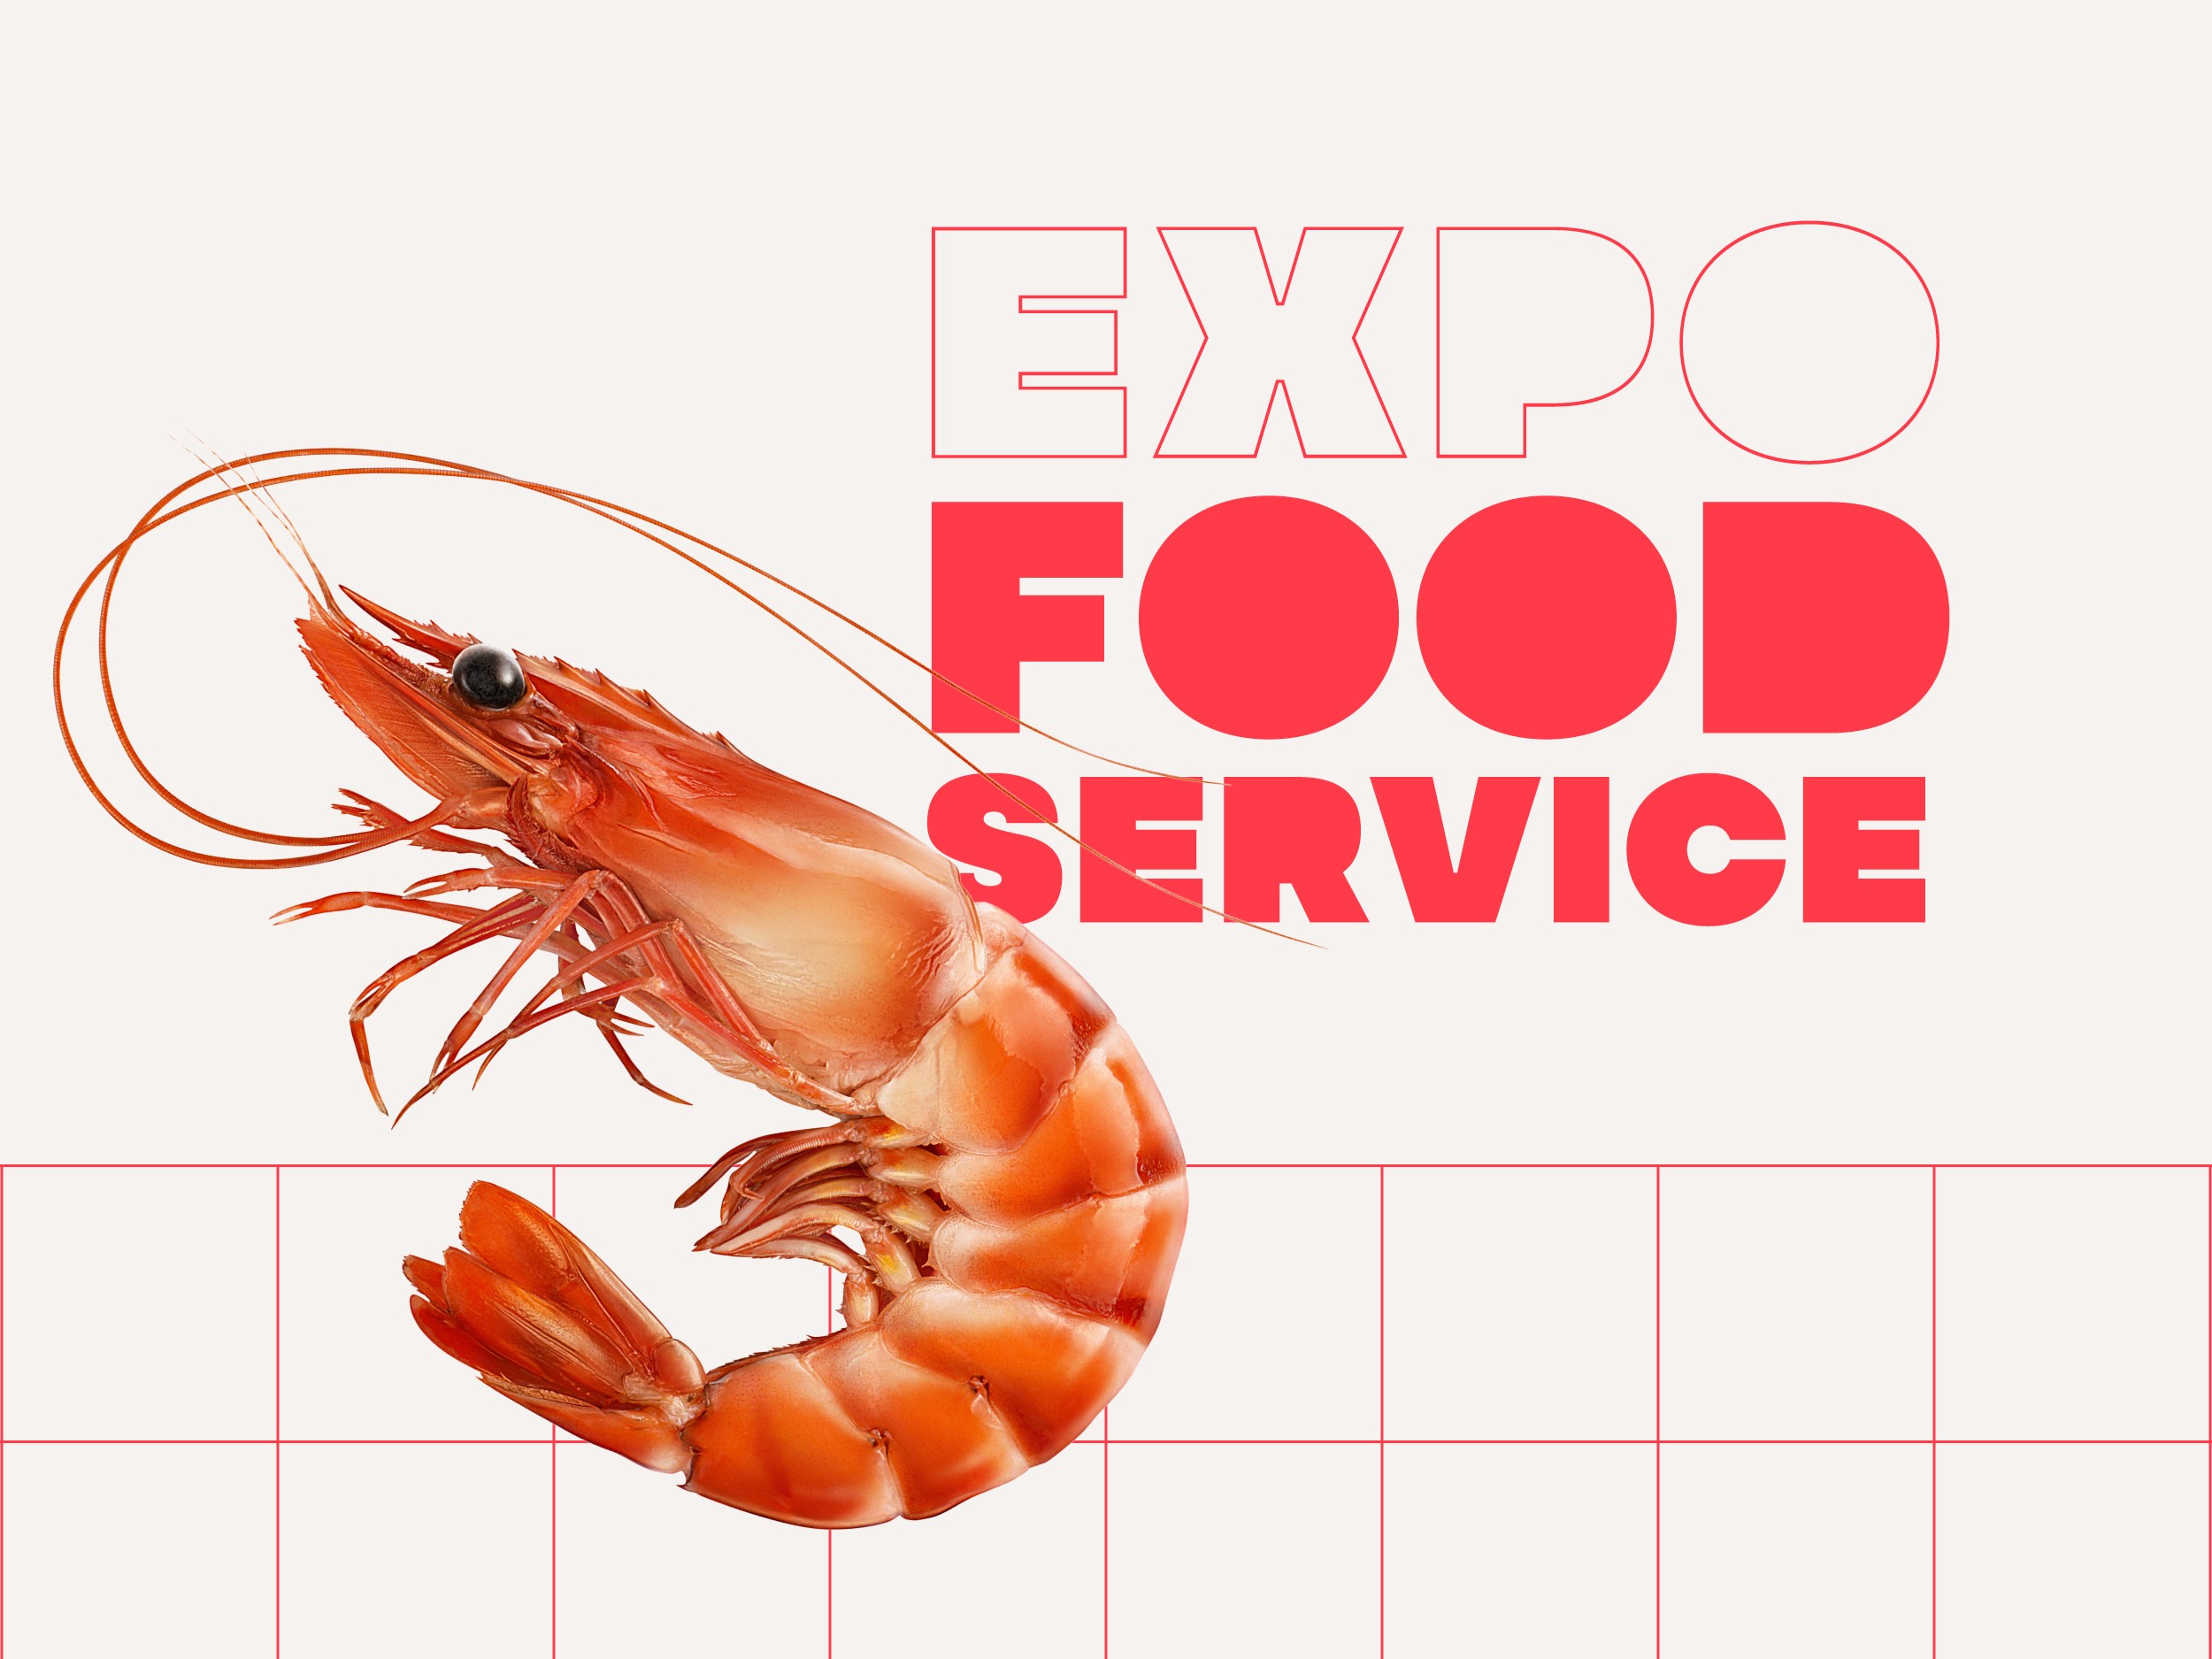 Expofoodservice 2021 congreso 3